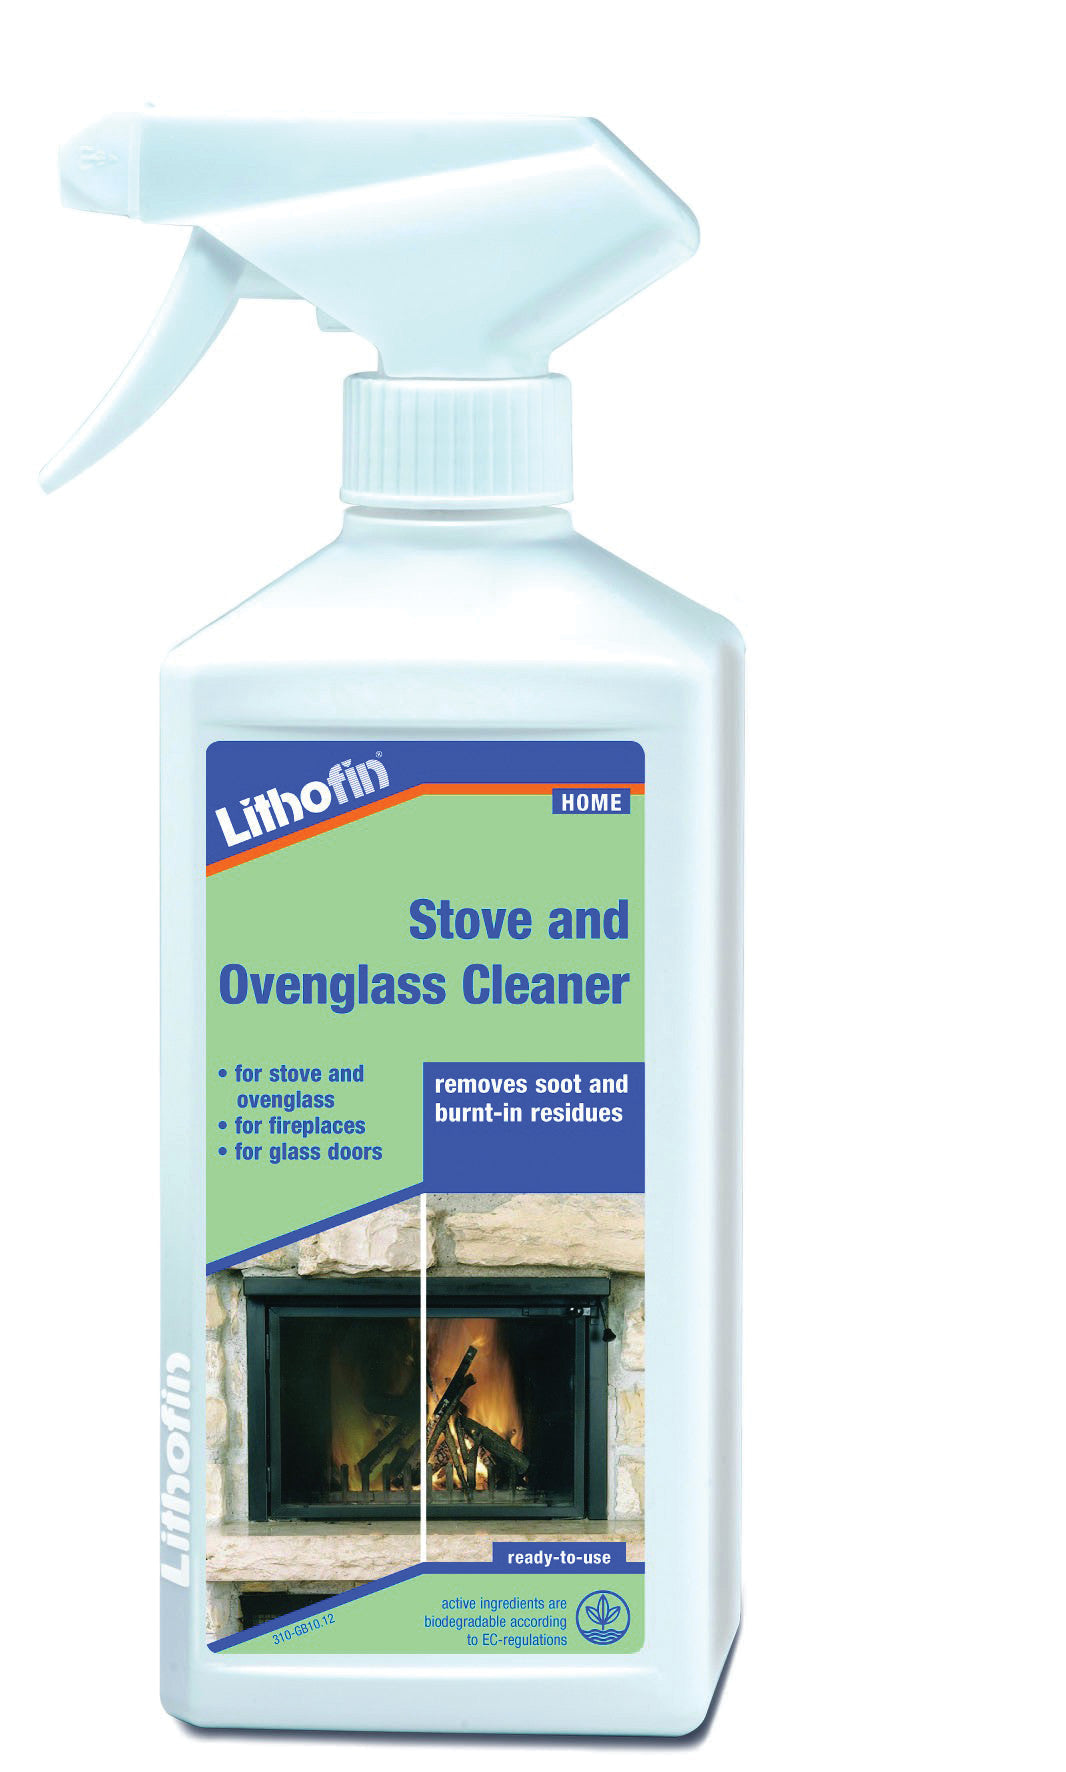 Lithofin stove and oven glass cleaner 